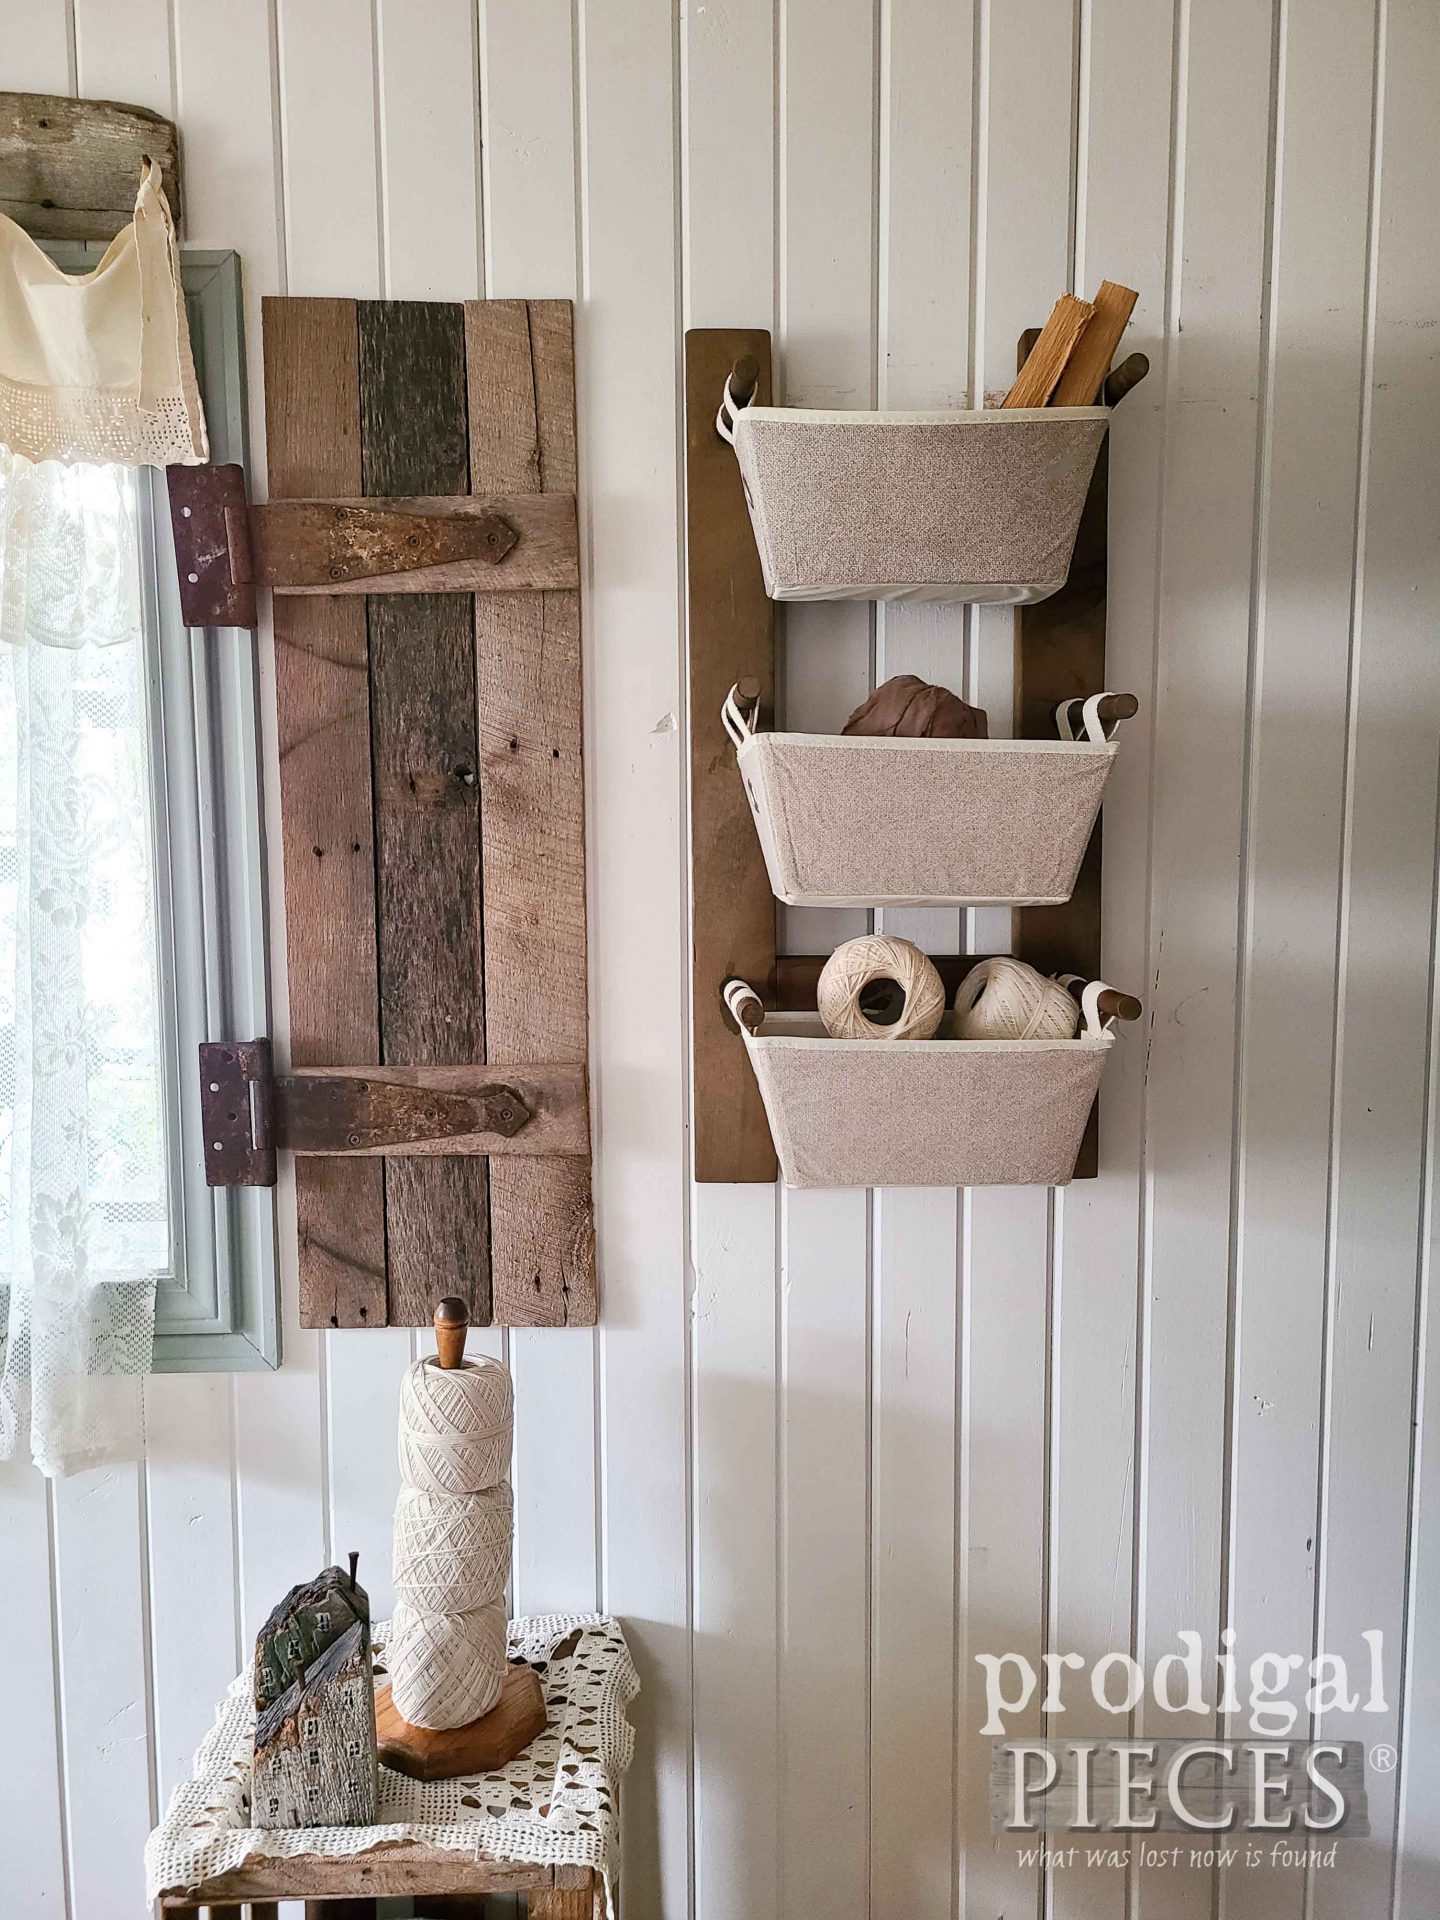 DIY Farmhouse Wall Storage Bins with Upcycled Spindles and Free Build Plans by Larissa of Prodigal Pieces | prodigalpieces.com #prodigalpieces #farmhouse #storage #dollarstore